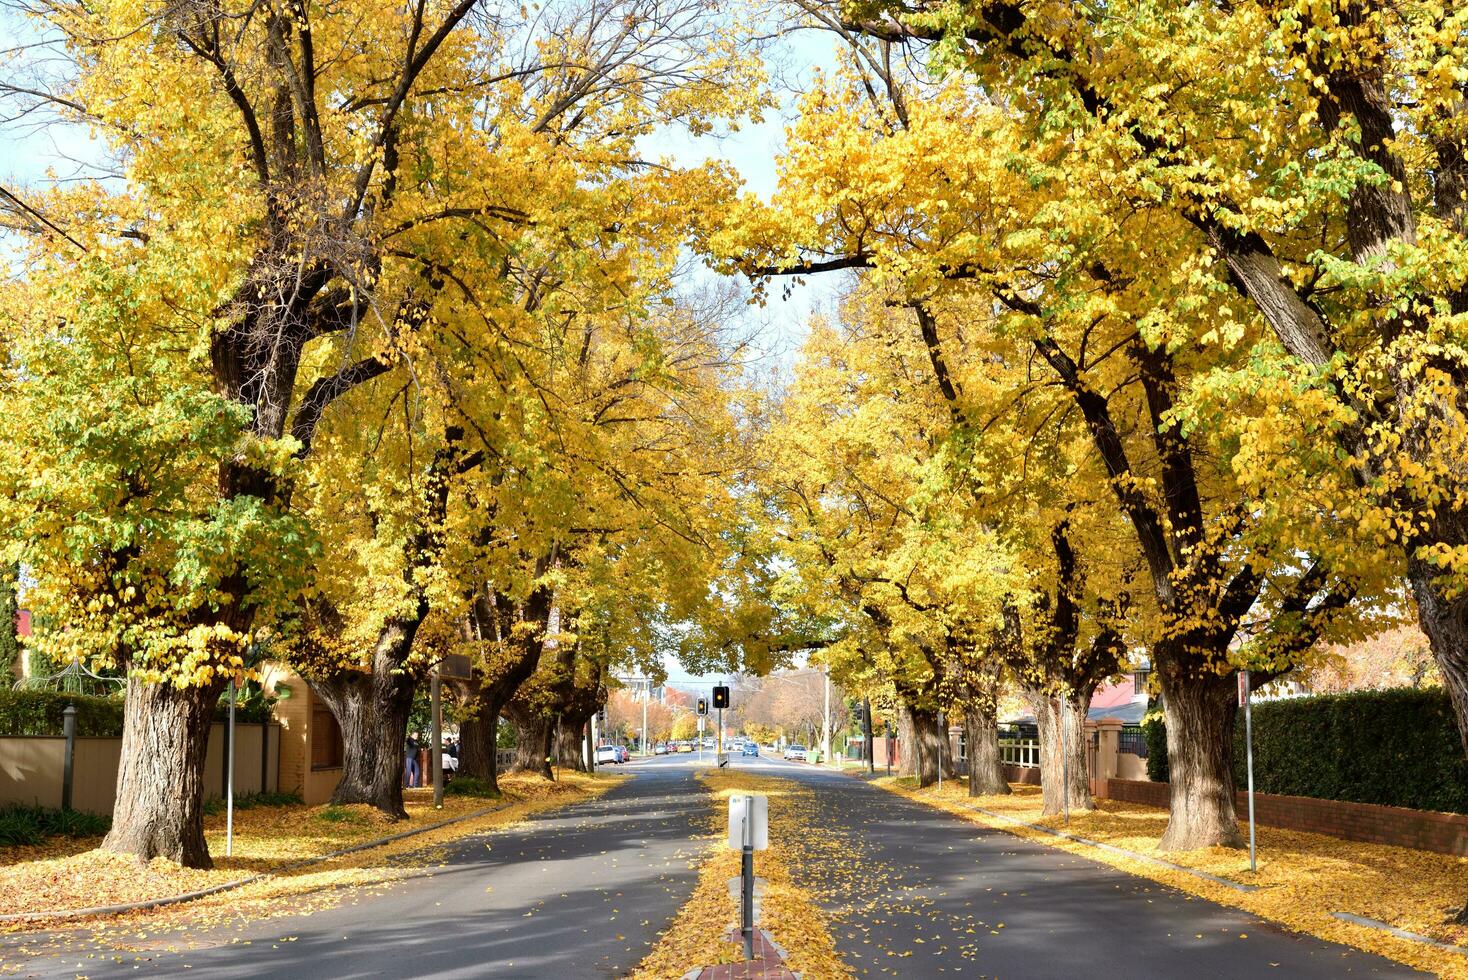 Beautiful autumn season cityscape fallen leaves in the height of autumn to capture the vibrant yellow of the Ginkgo tree along the road in Albury, New South Wales, Australia. photo